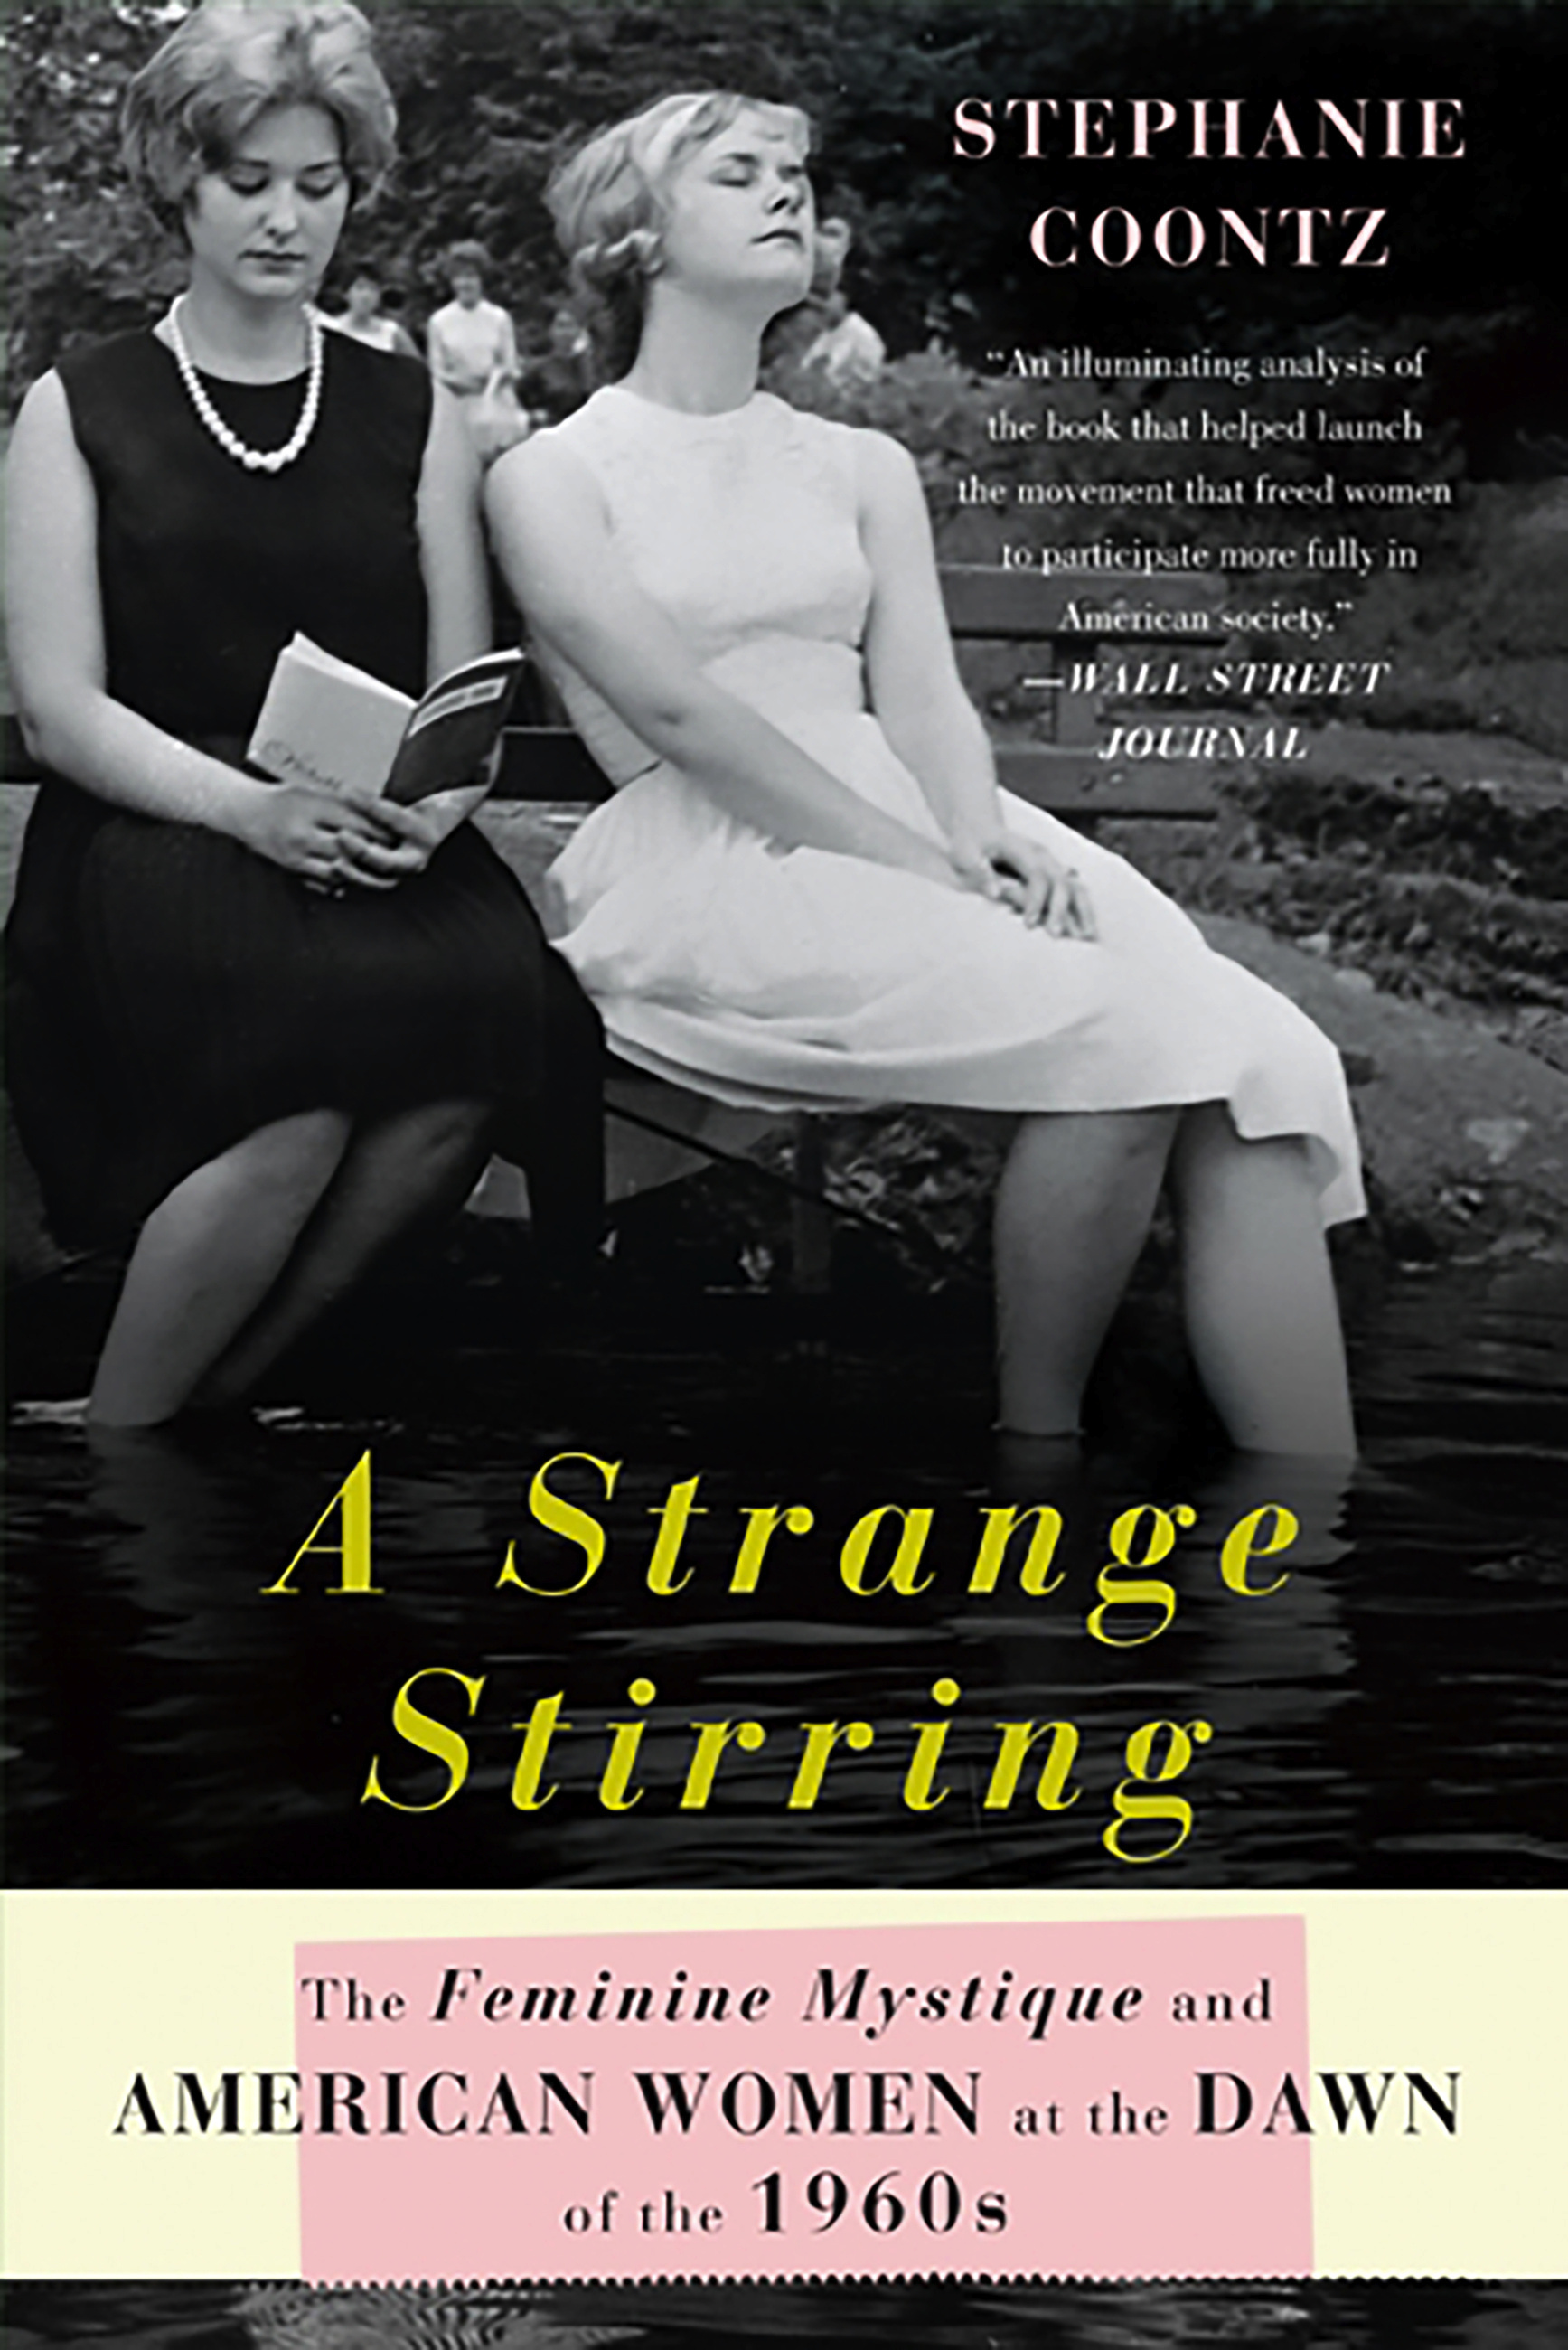 A Strange Stirring The Feminine Mystique and American Women at the Dawn of the 1960s by Stephanie Coontz